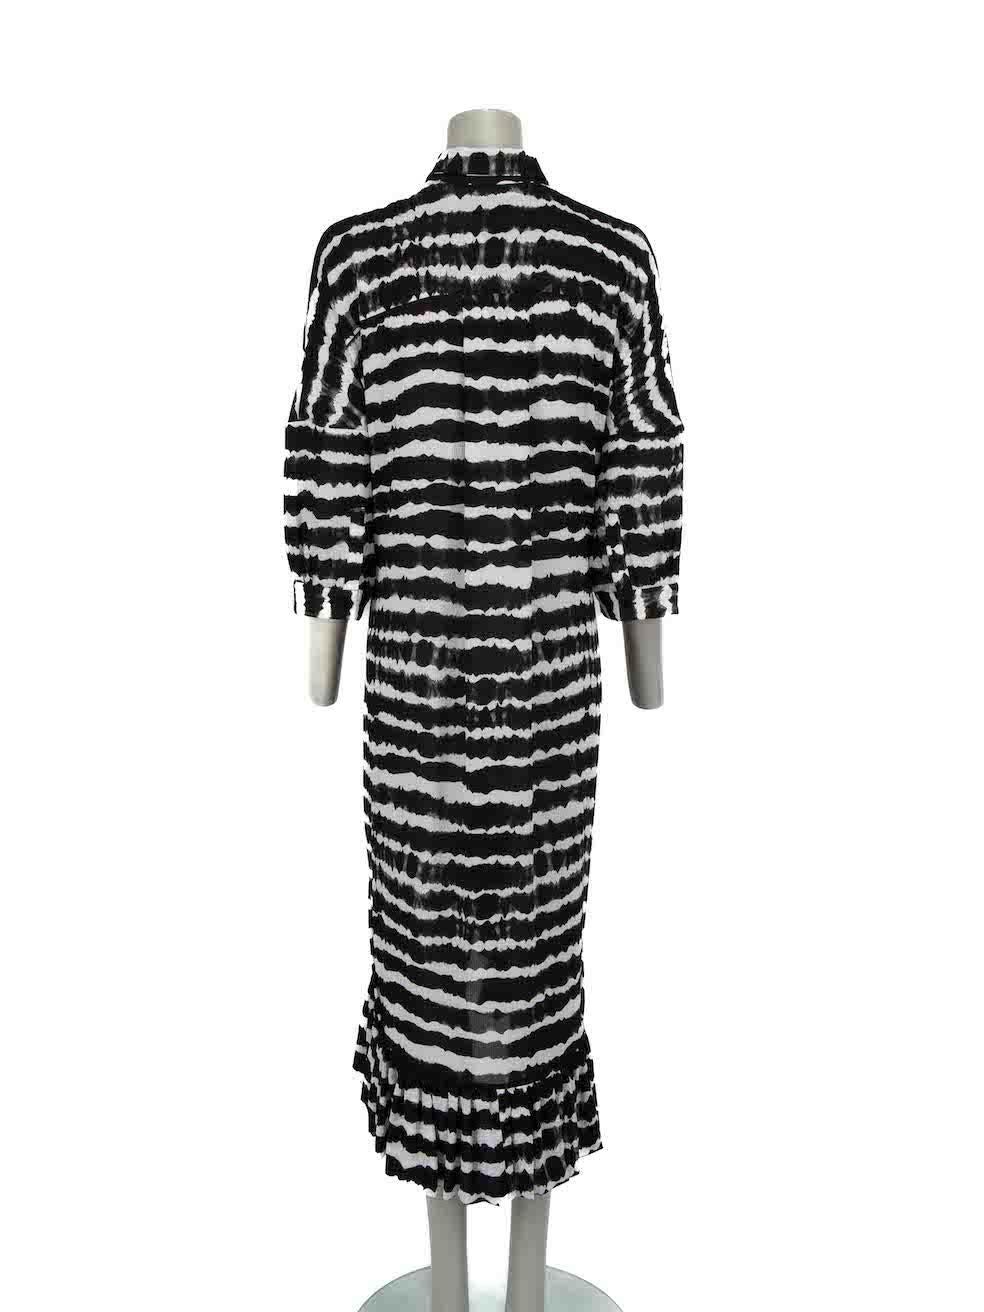 Preen By Thornton Bregazzi Black Stripe Shirt Dress Size L In Excellent Condition For Sale In London, GB